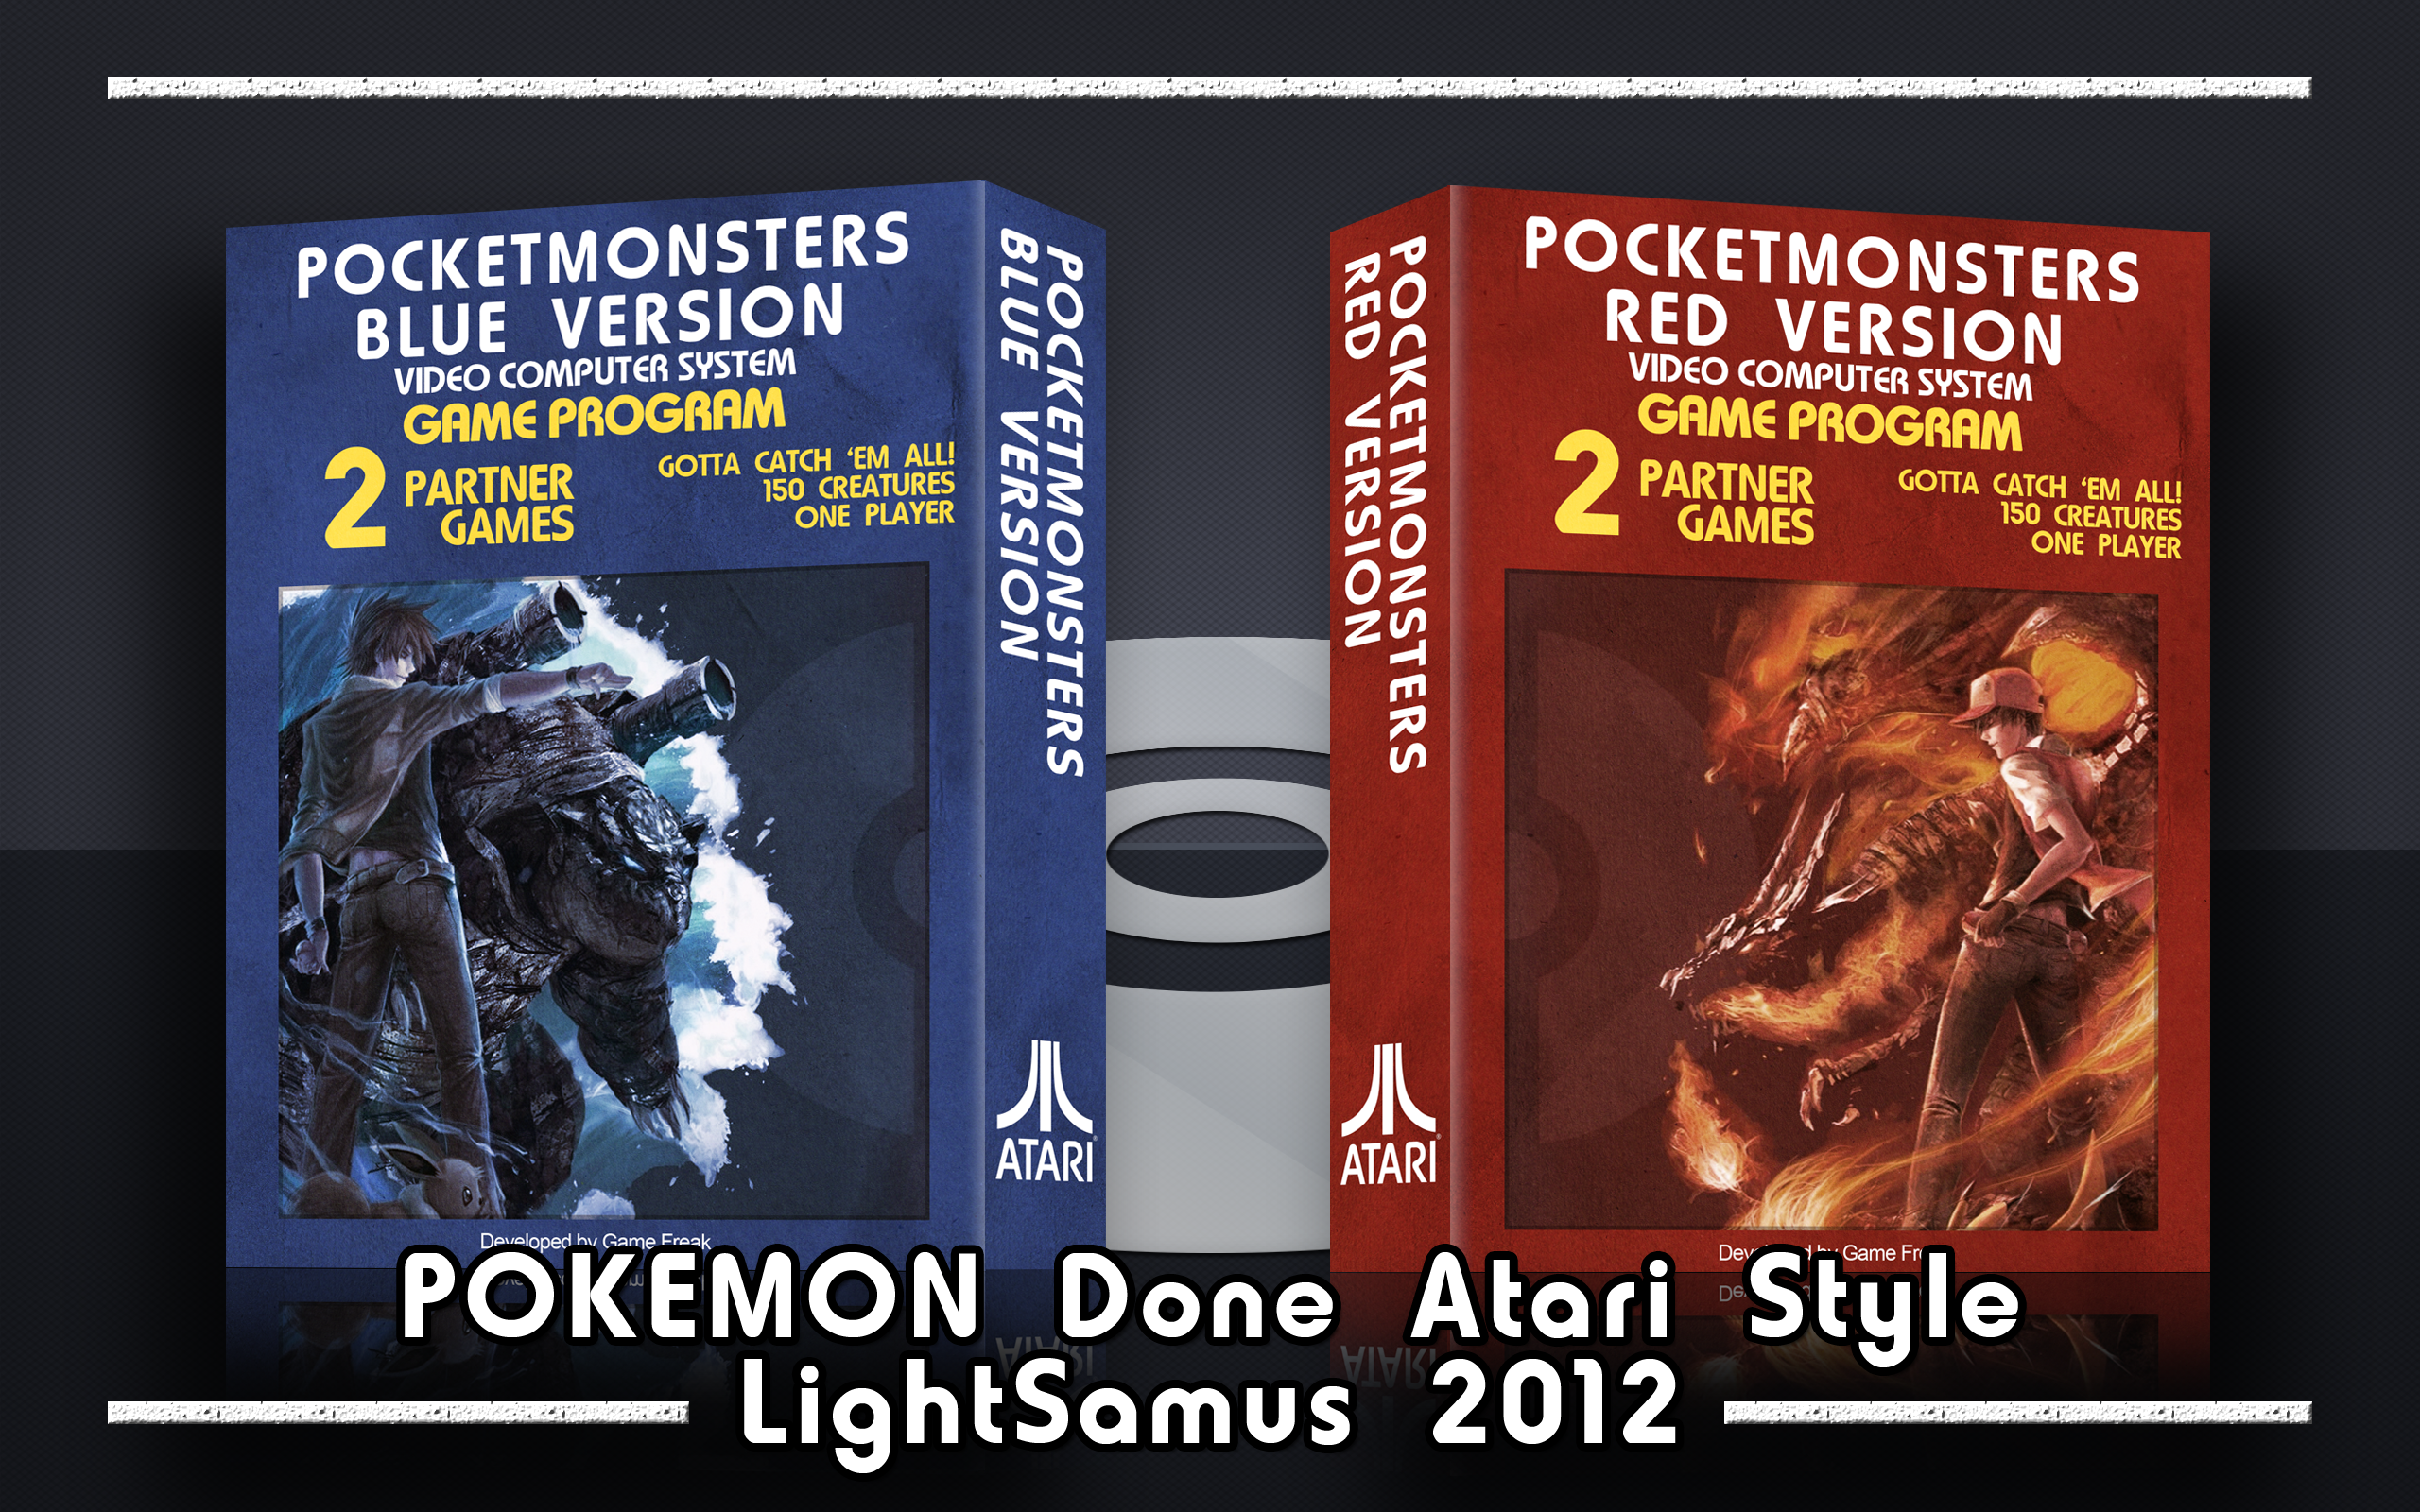 Pocket Monsters Red and Blue Versions box cover